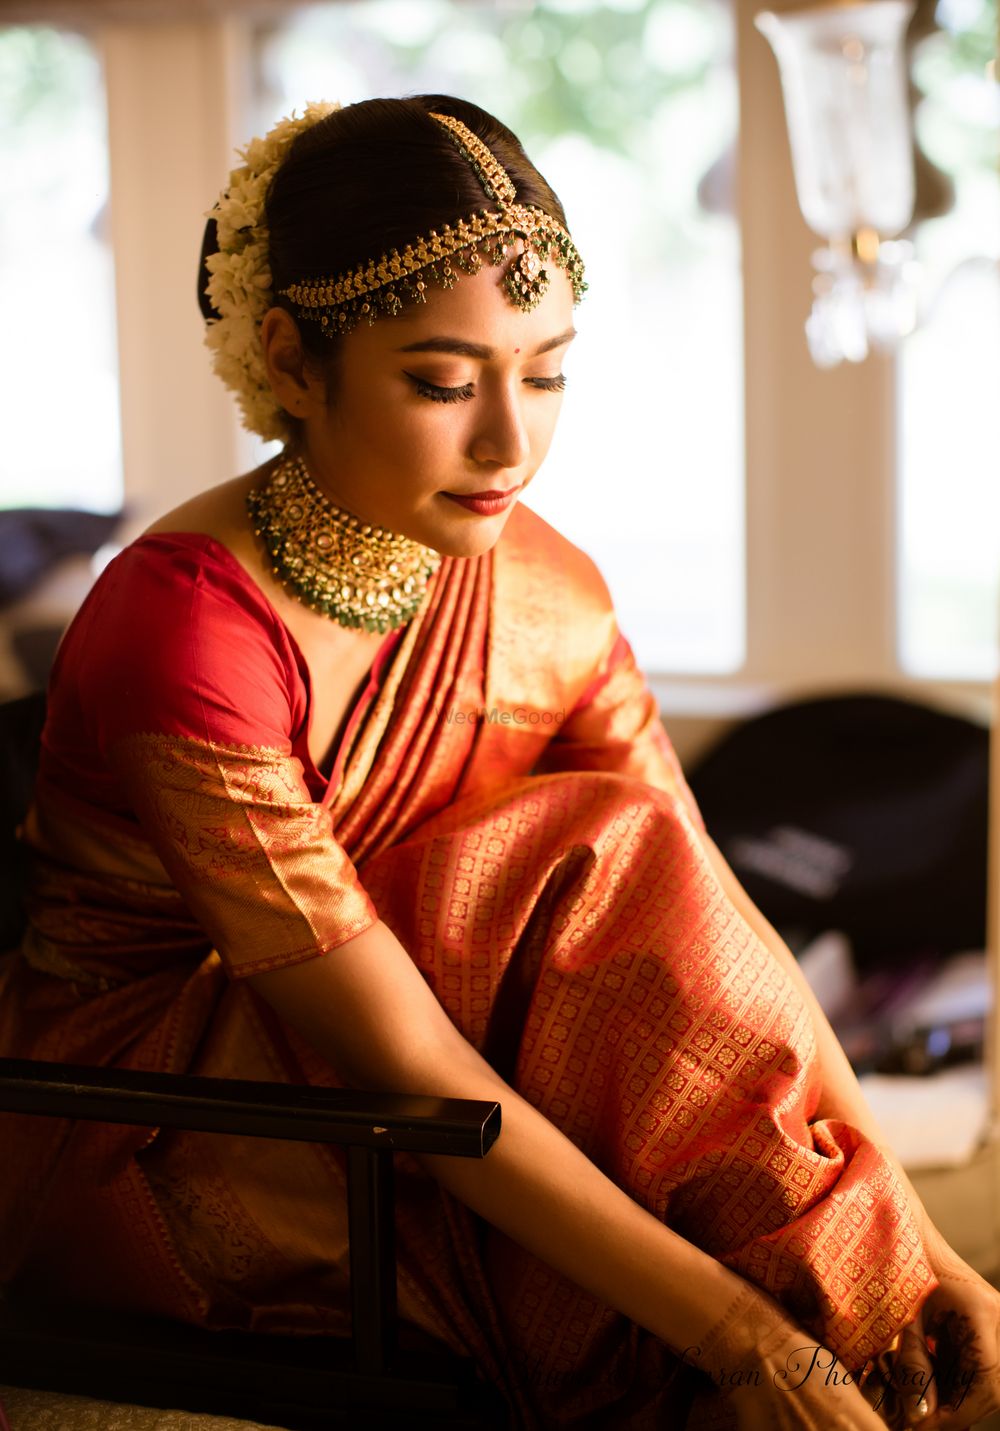 Photo of South Indian bride getting ready portrait in orange saree